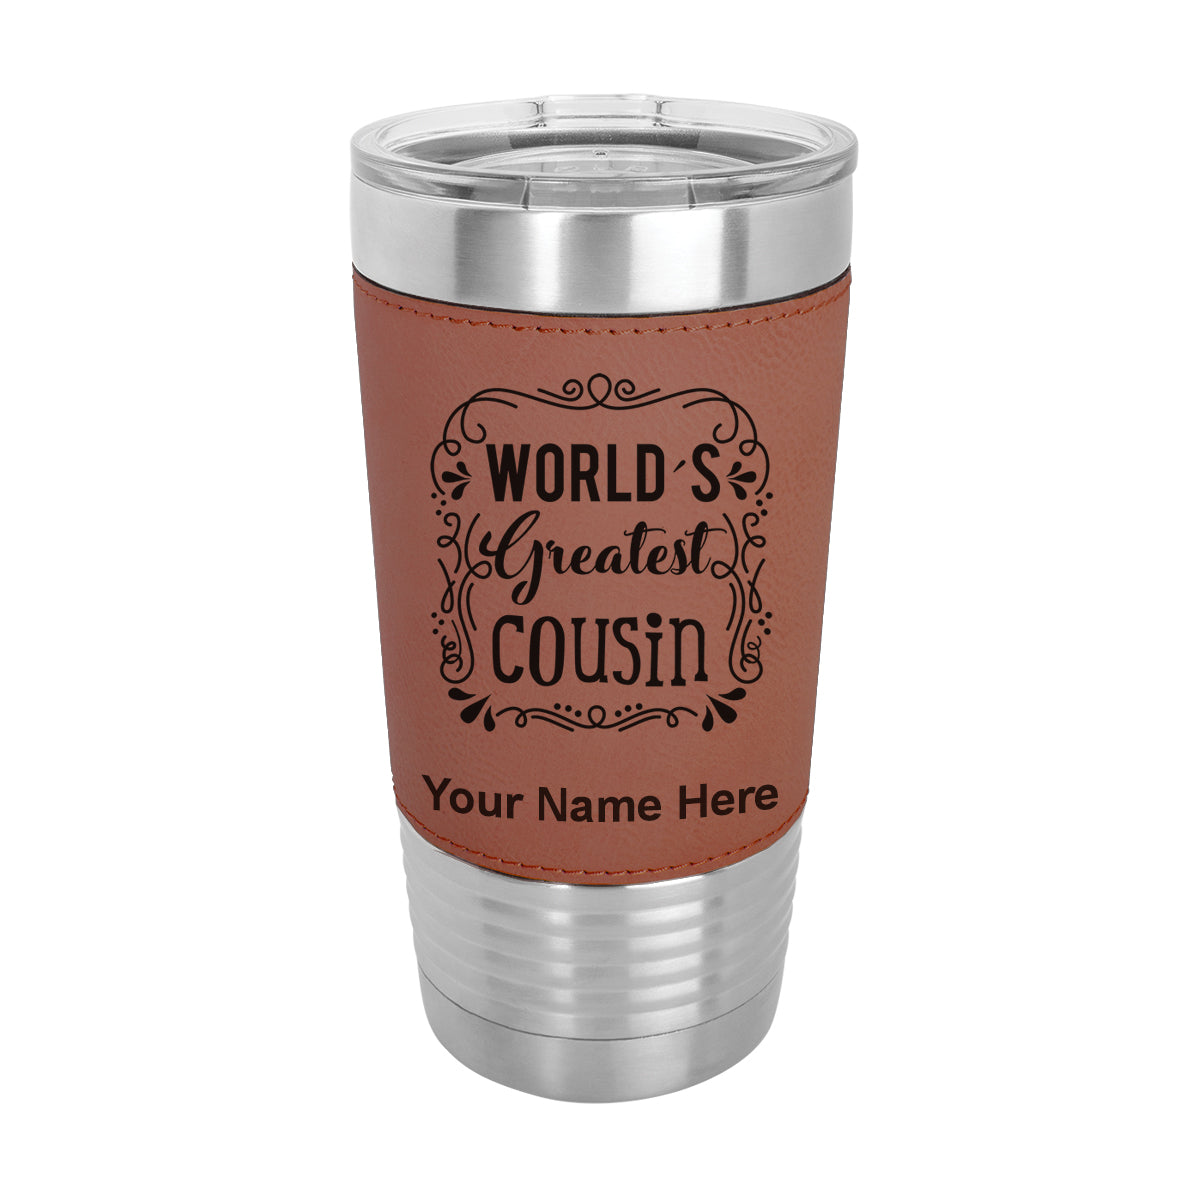 20oz Faux Leather Tumbler Mug, World's Greatest Cousin, Personalized Engraving Included